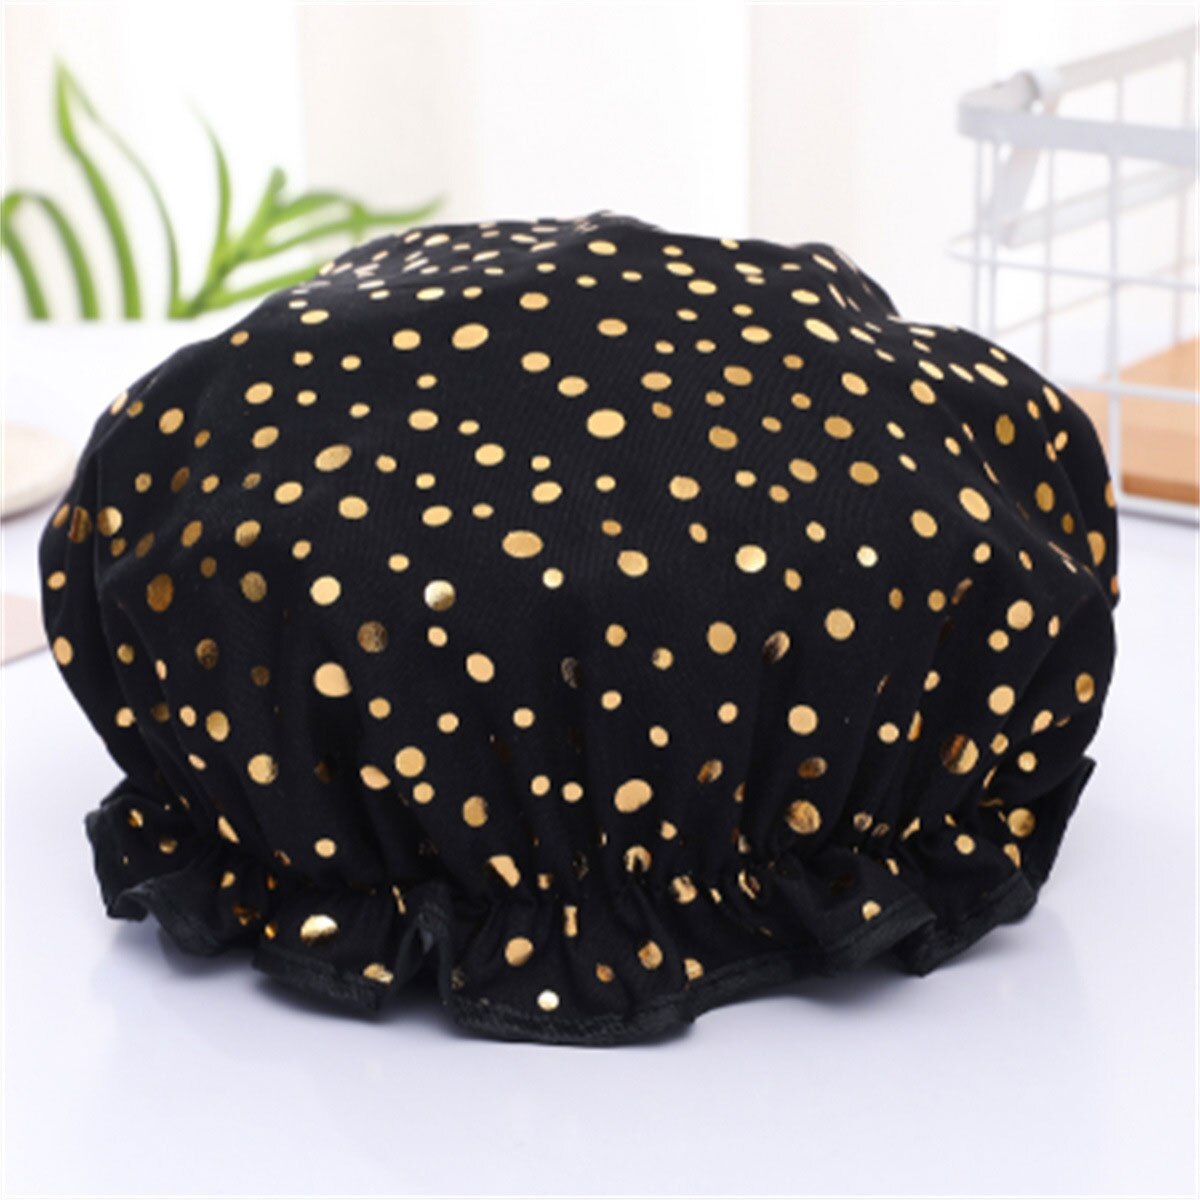 Ladies Hair Cap Hat Supplies Bathroom Double Layer Shower Waterproof Thick Cover Accessories 1pcs